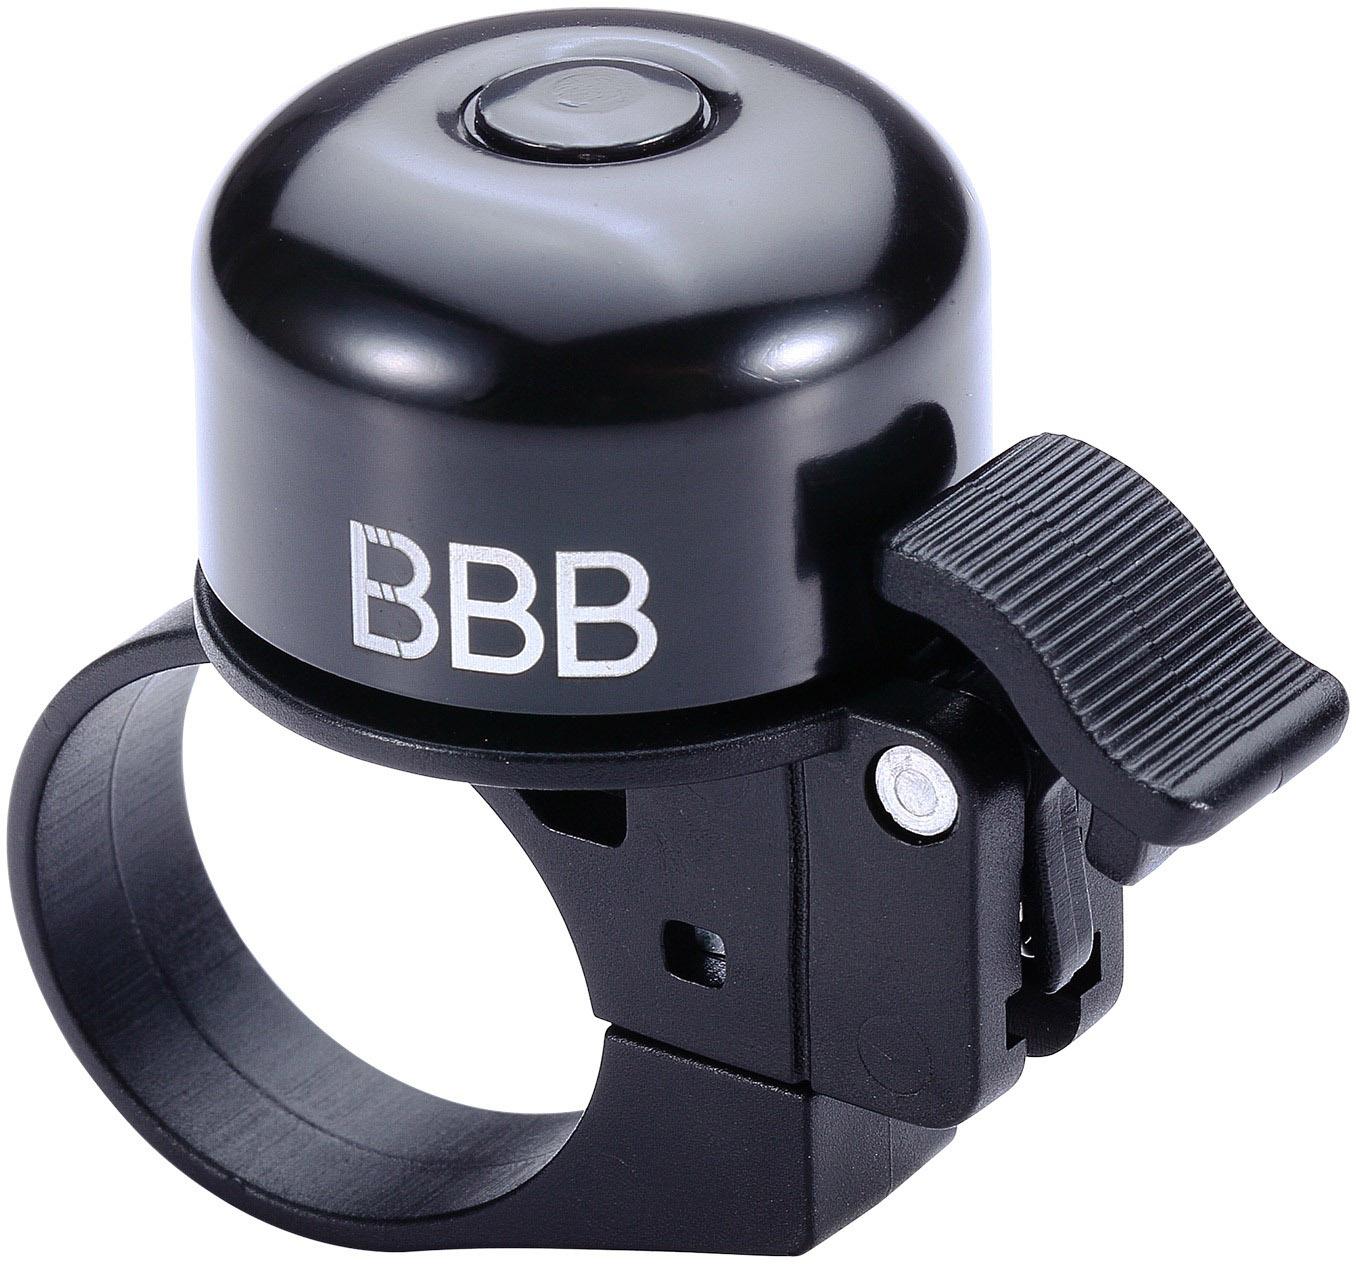 Bbb Bbb-11 Loud And Clear Bike Bell - Black